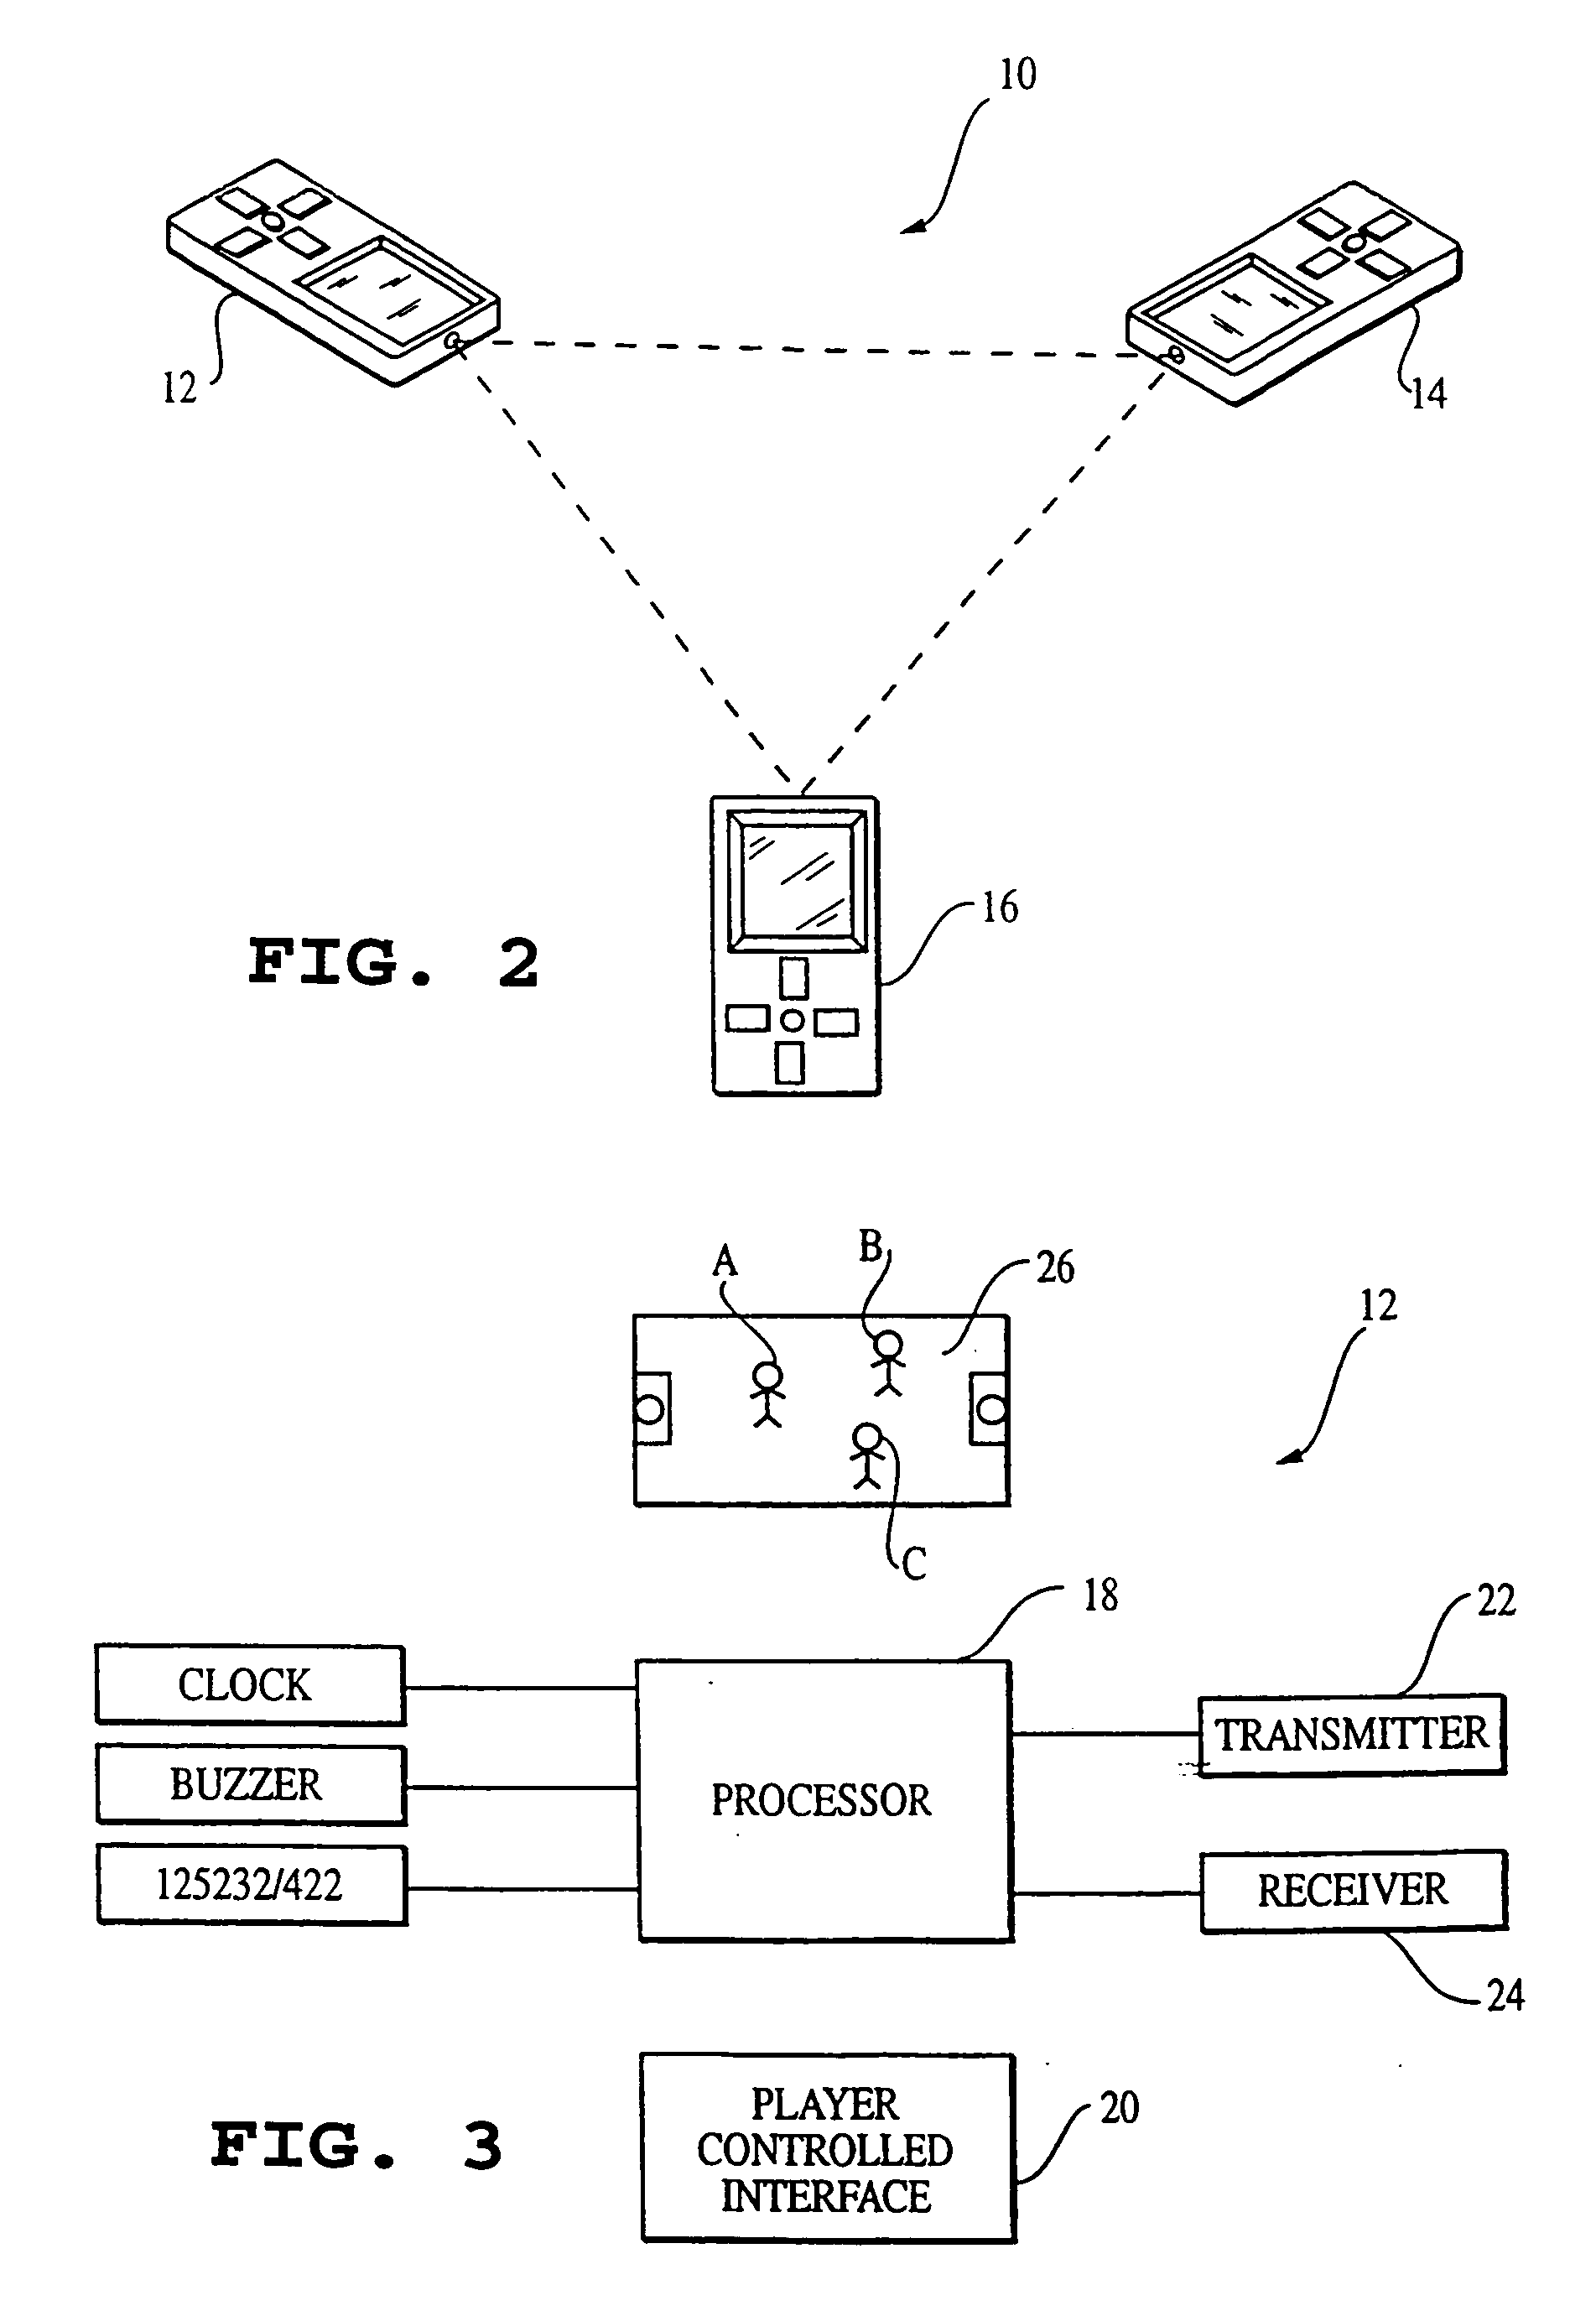 System and method for interactive messaging and/or allocating and/or upgrading and/or rewarding tickets, other event admittance means, goods and/or services